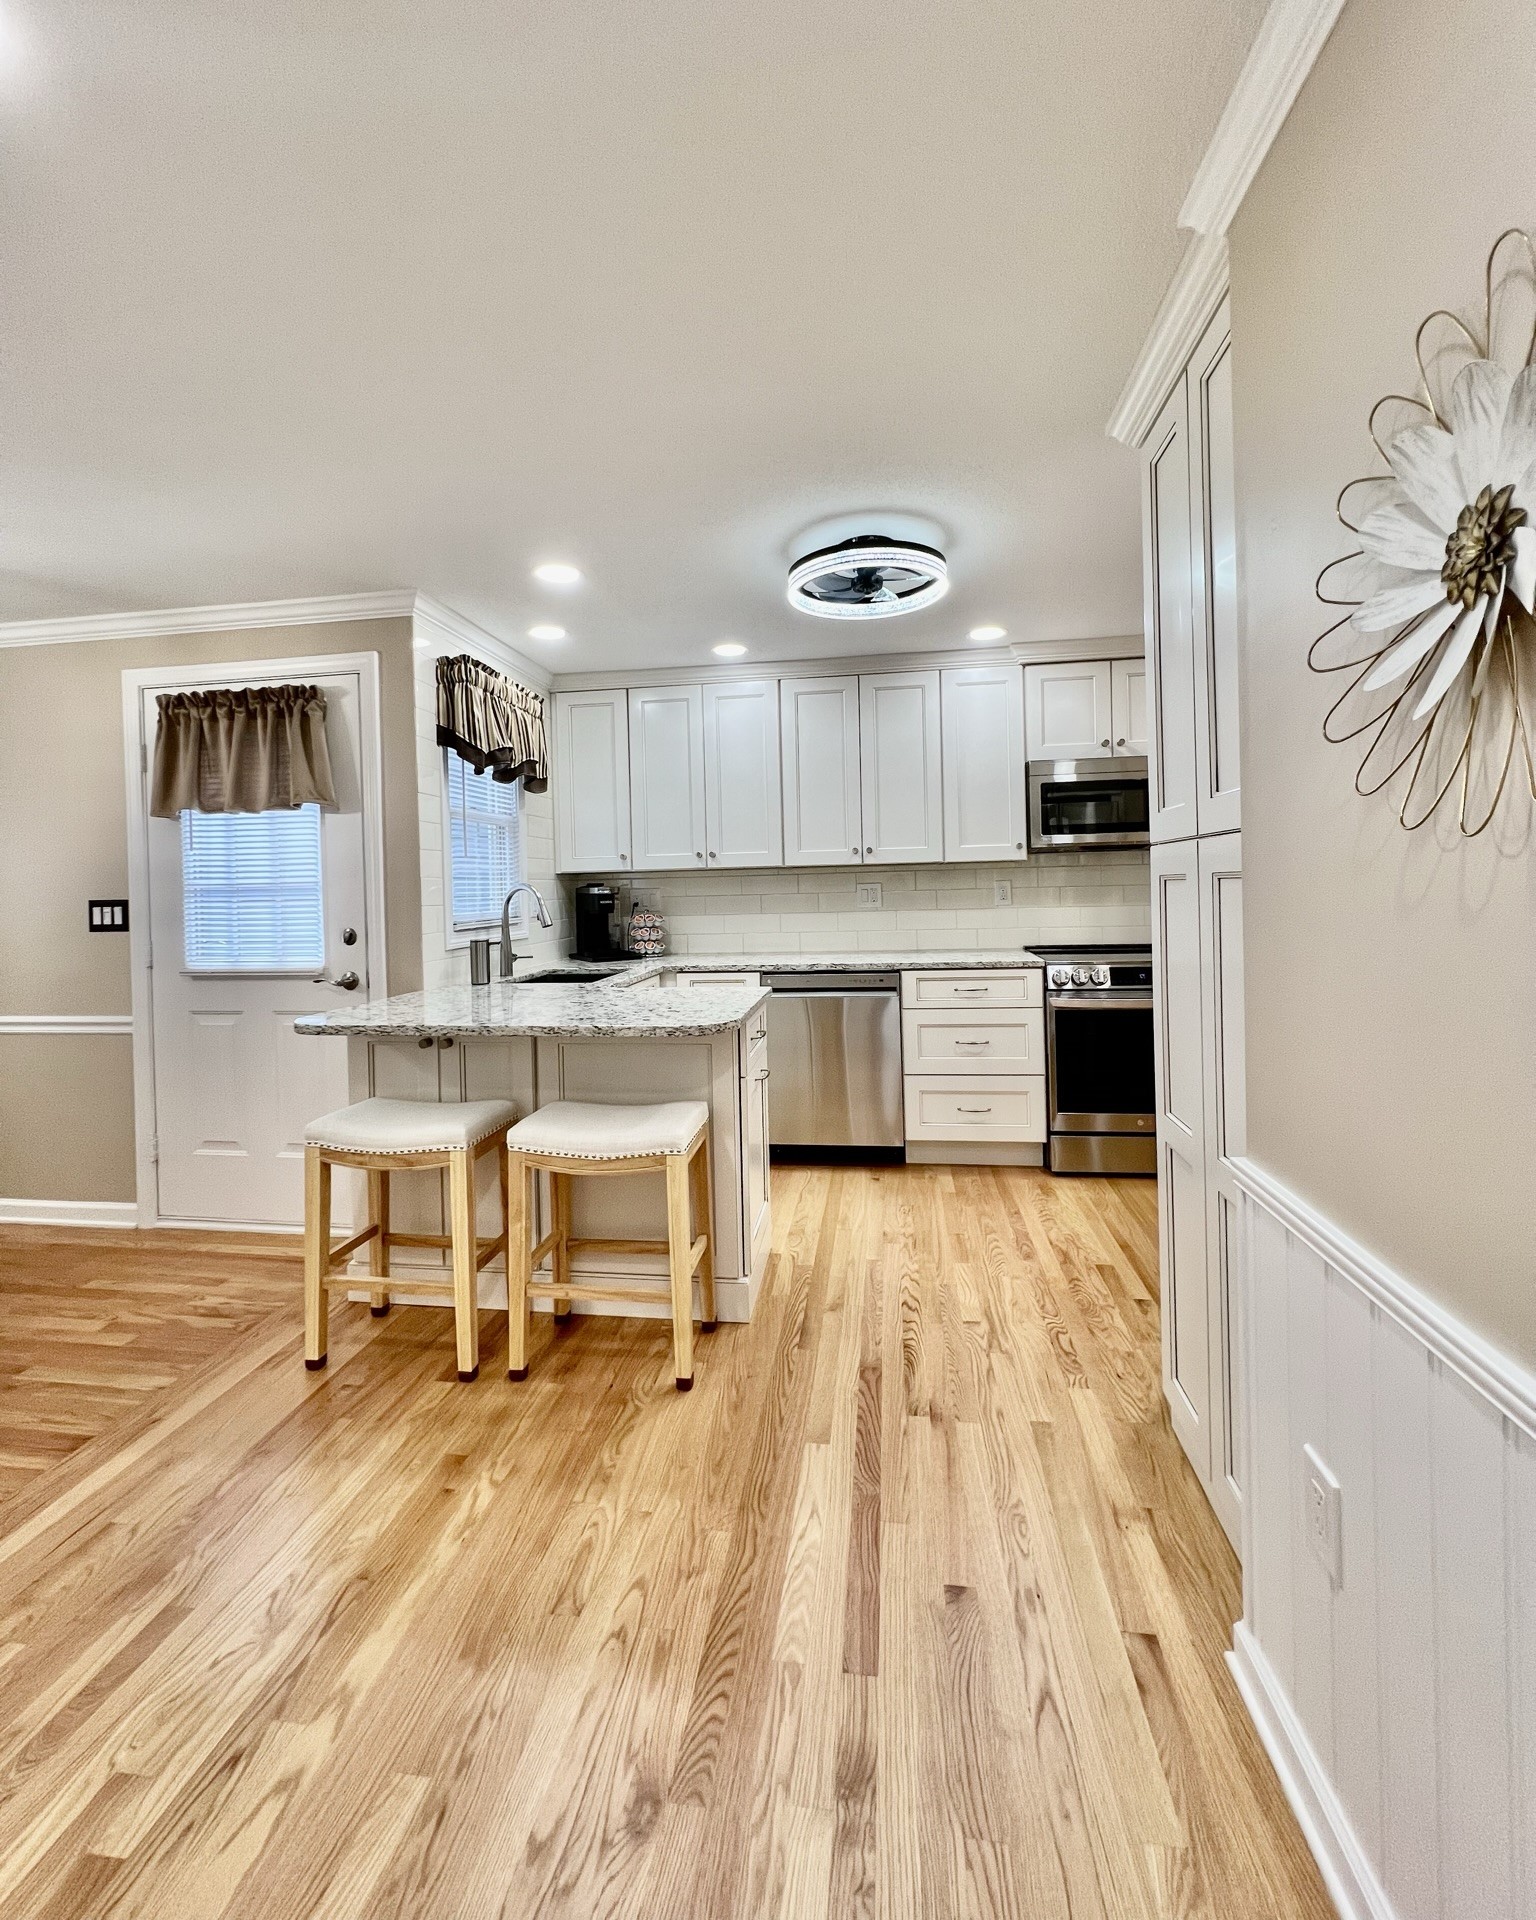 Cover photo for condo kitchen remodeling project in Wallington, Connecticut